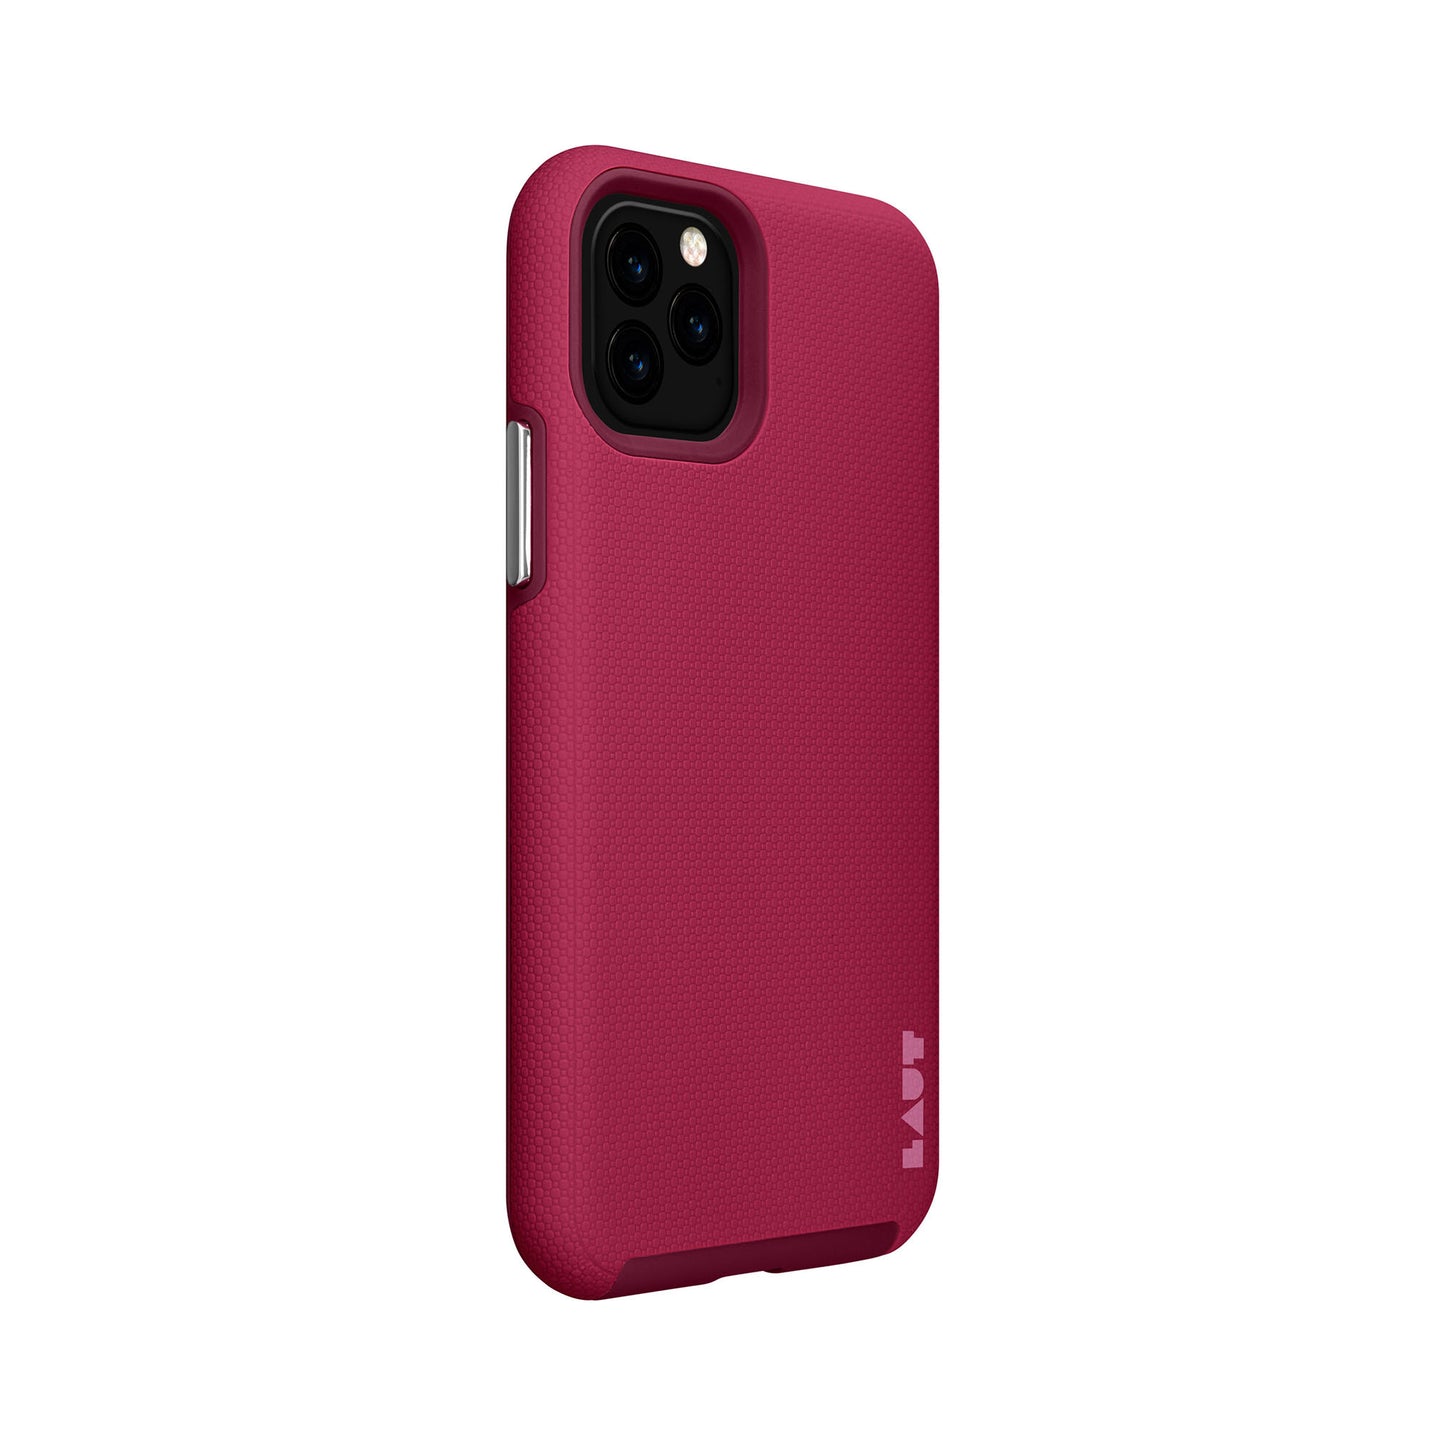 LAUT Shield for iPhone 11 Pro Max - Cherry